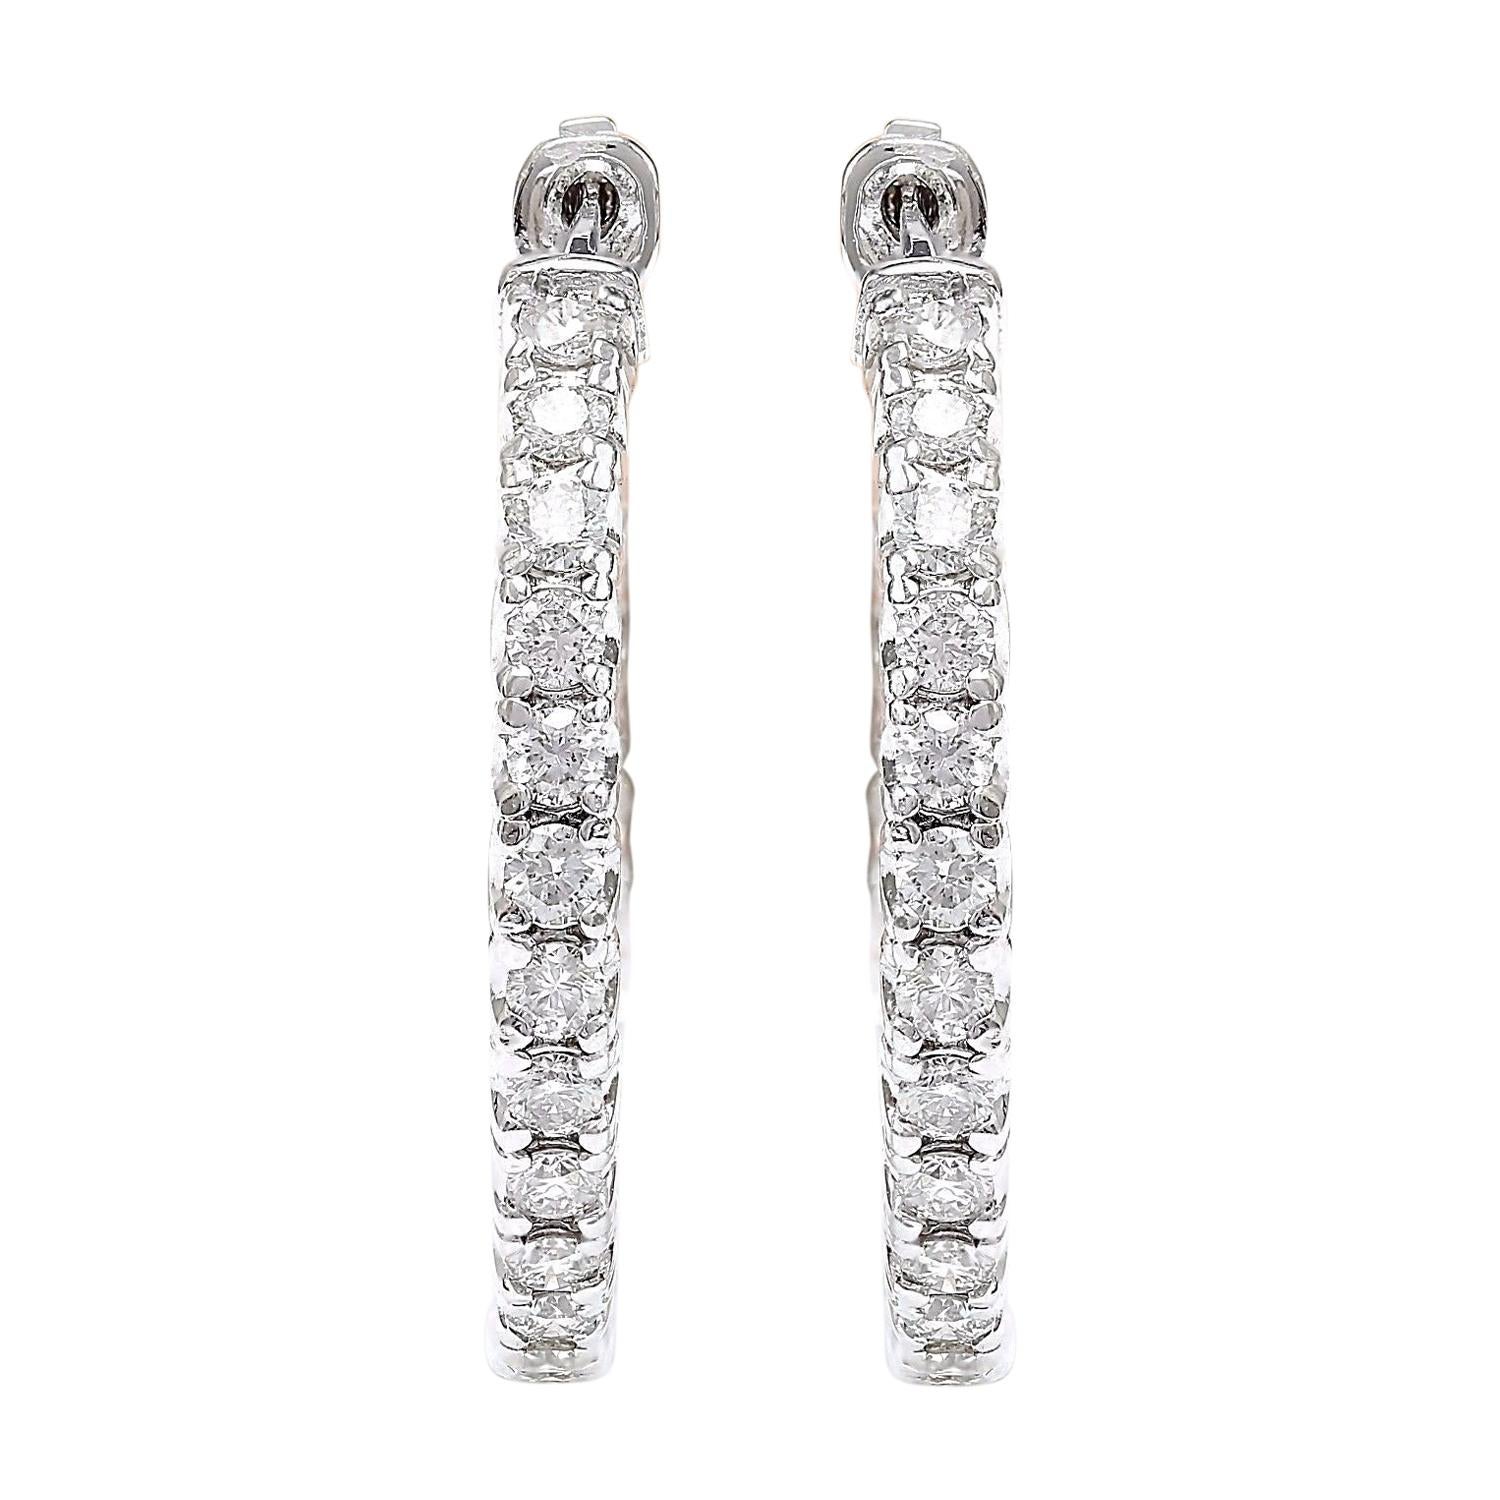 2.25 Carat Natural Diamond 18K Solid White Gold Earrings
 Item Type: Earrings
 Item Style: Hoop
 Item Diameter: 27.95 mm
 Material: 18K White Gold
 Mainstone: Diamond
 Stone Color: F-G
 Stone Clarity: VS2-SI1
 Stone Weight: 2.25 Carat
 Stone Shape: